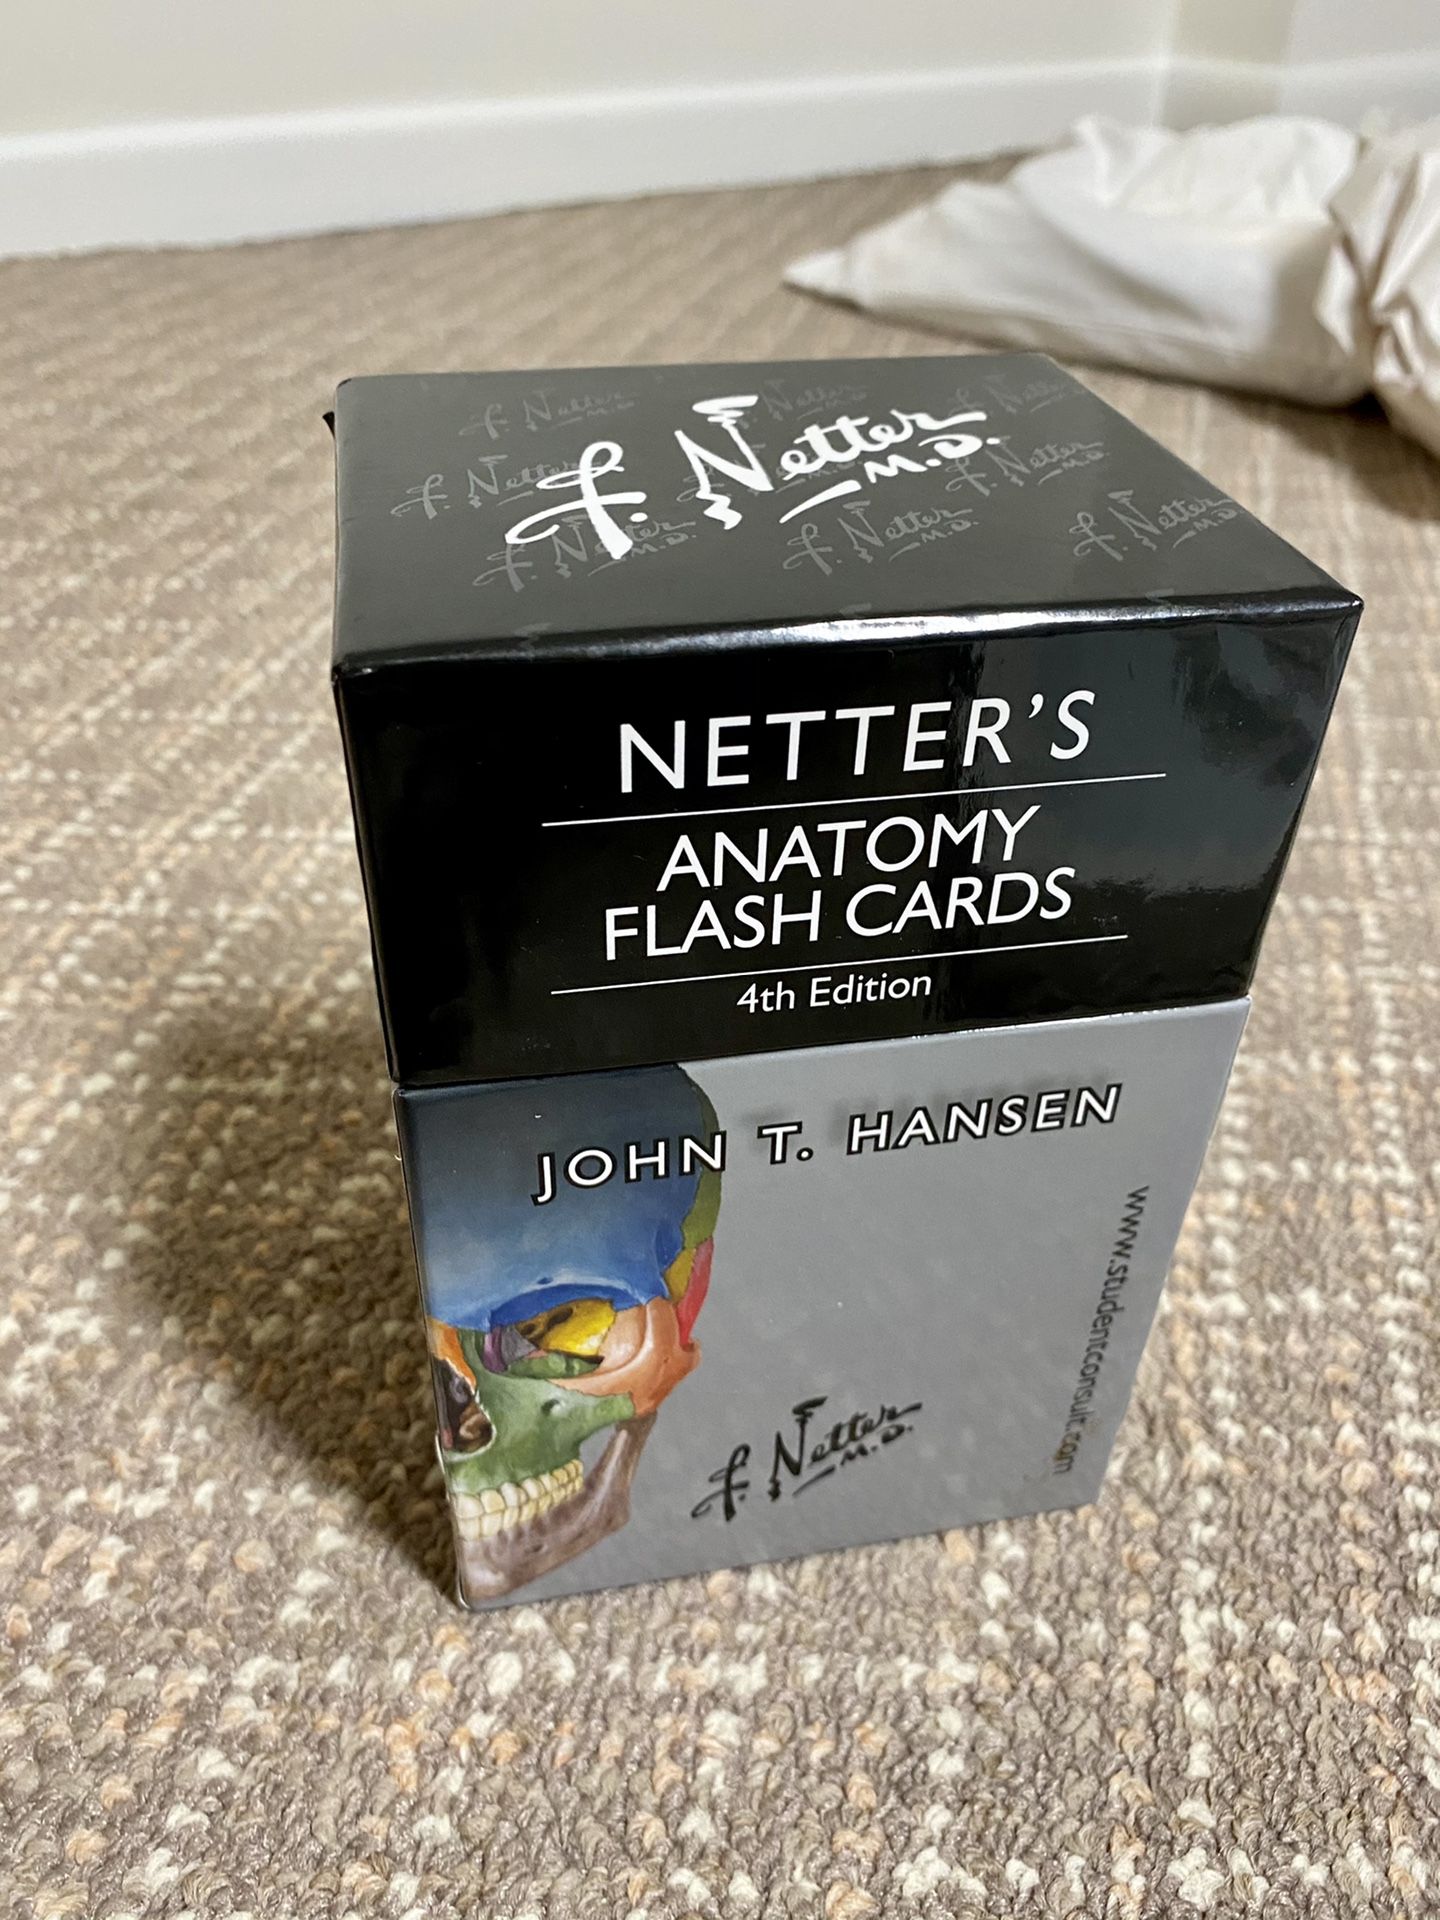 Netter’s Anatomy Flash Cards 4th Edition